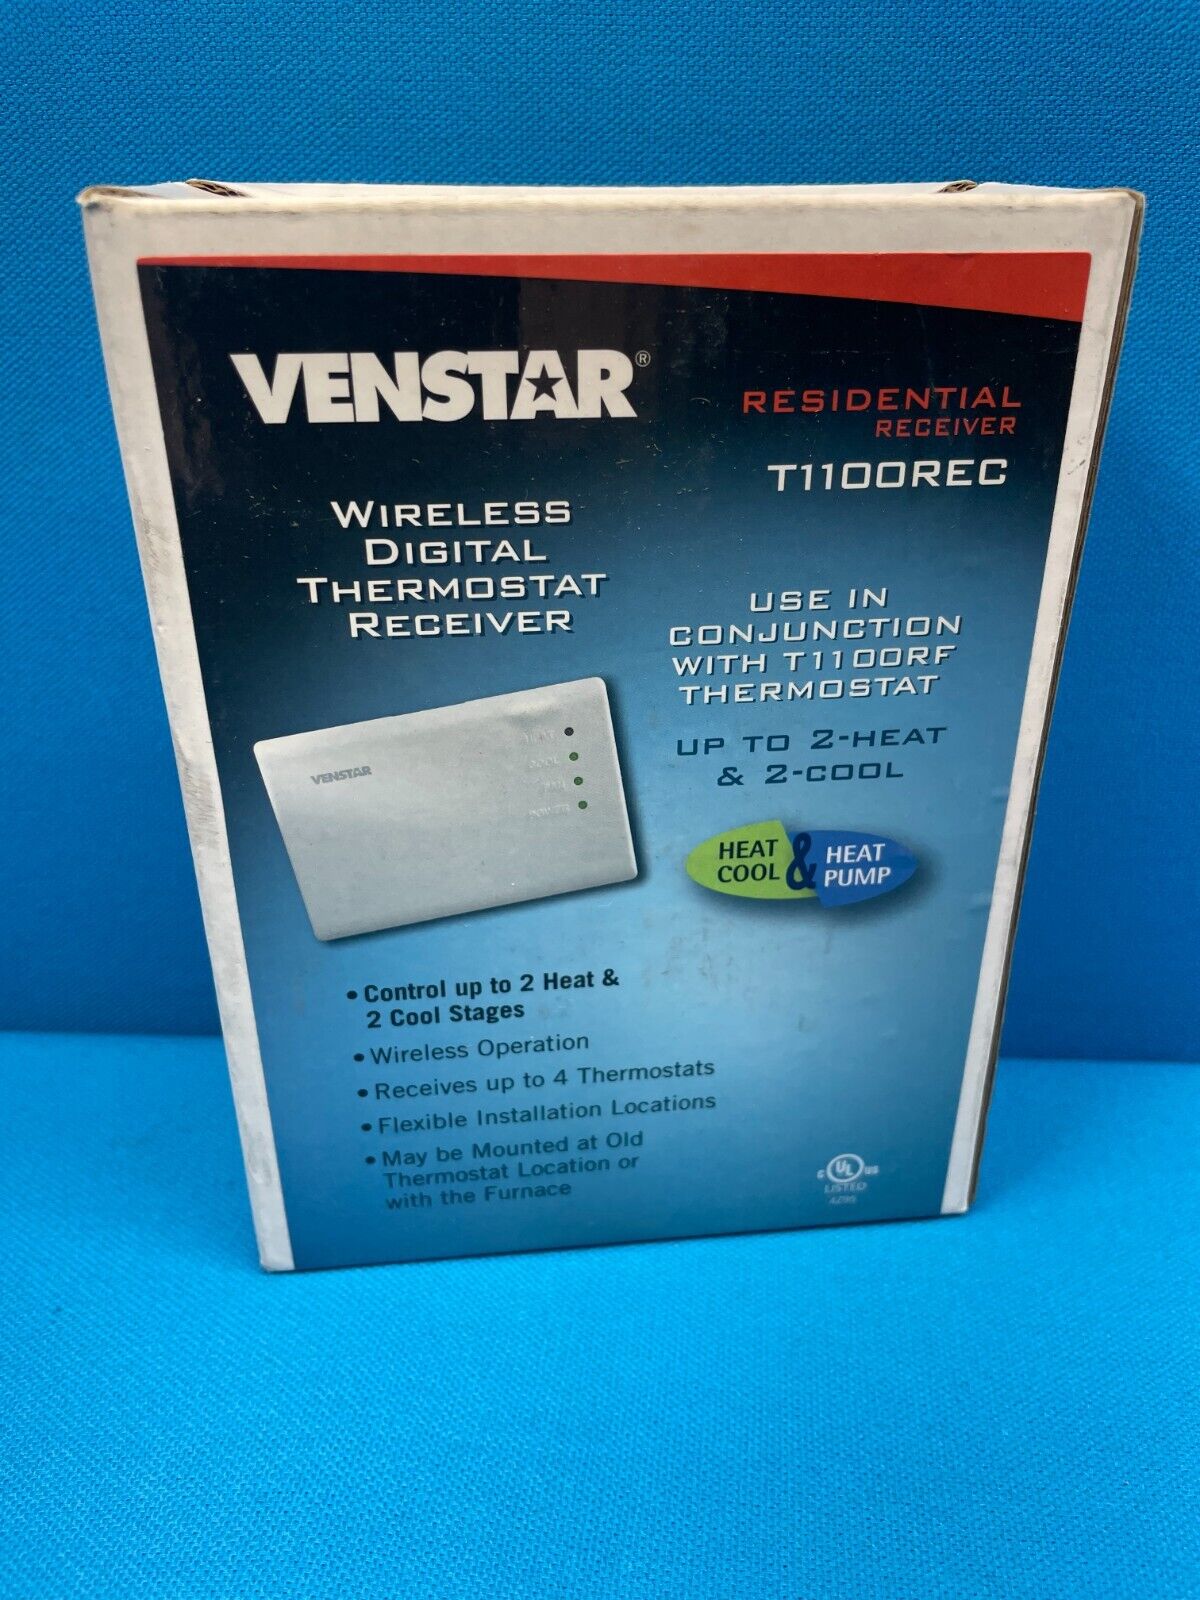 Venstar Replacement Wireless Digital Residential Thermostat Receiver T1100REC